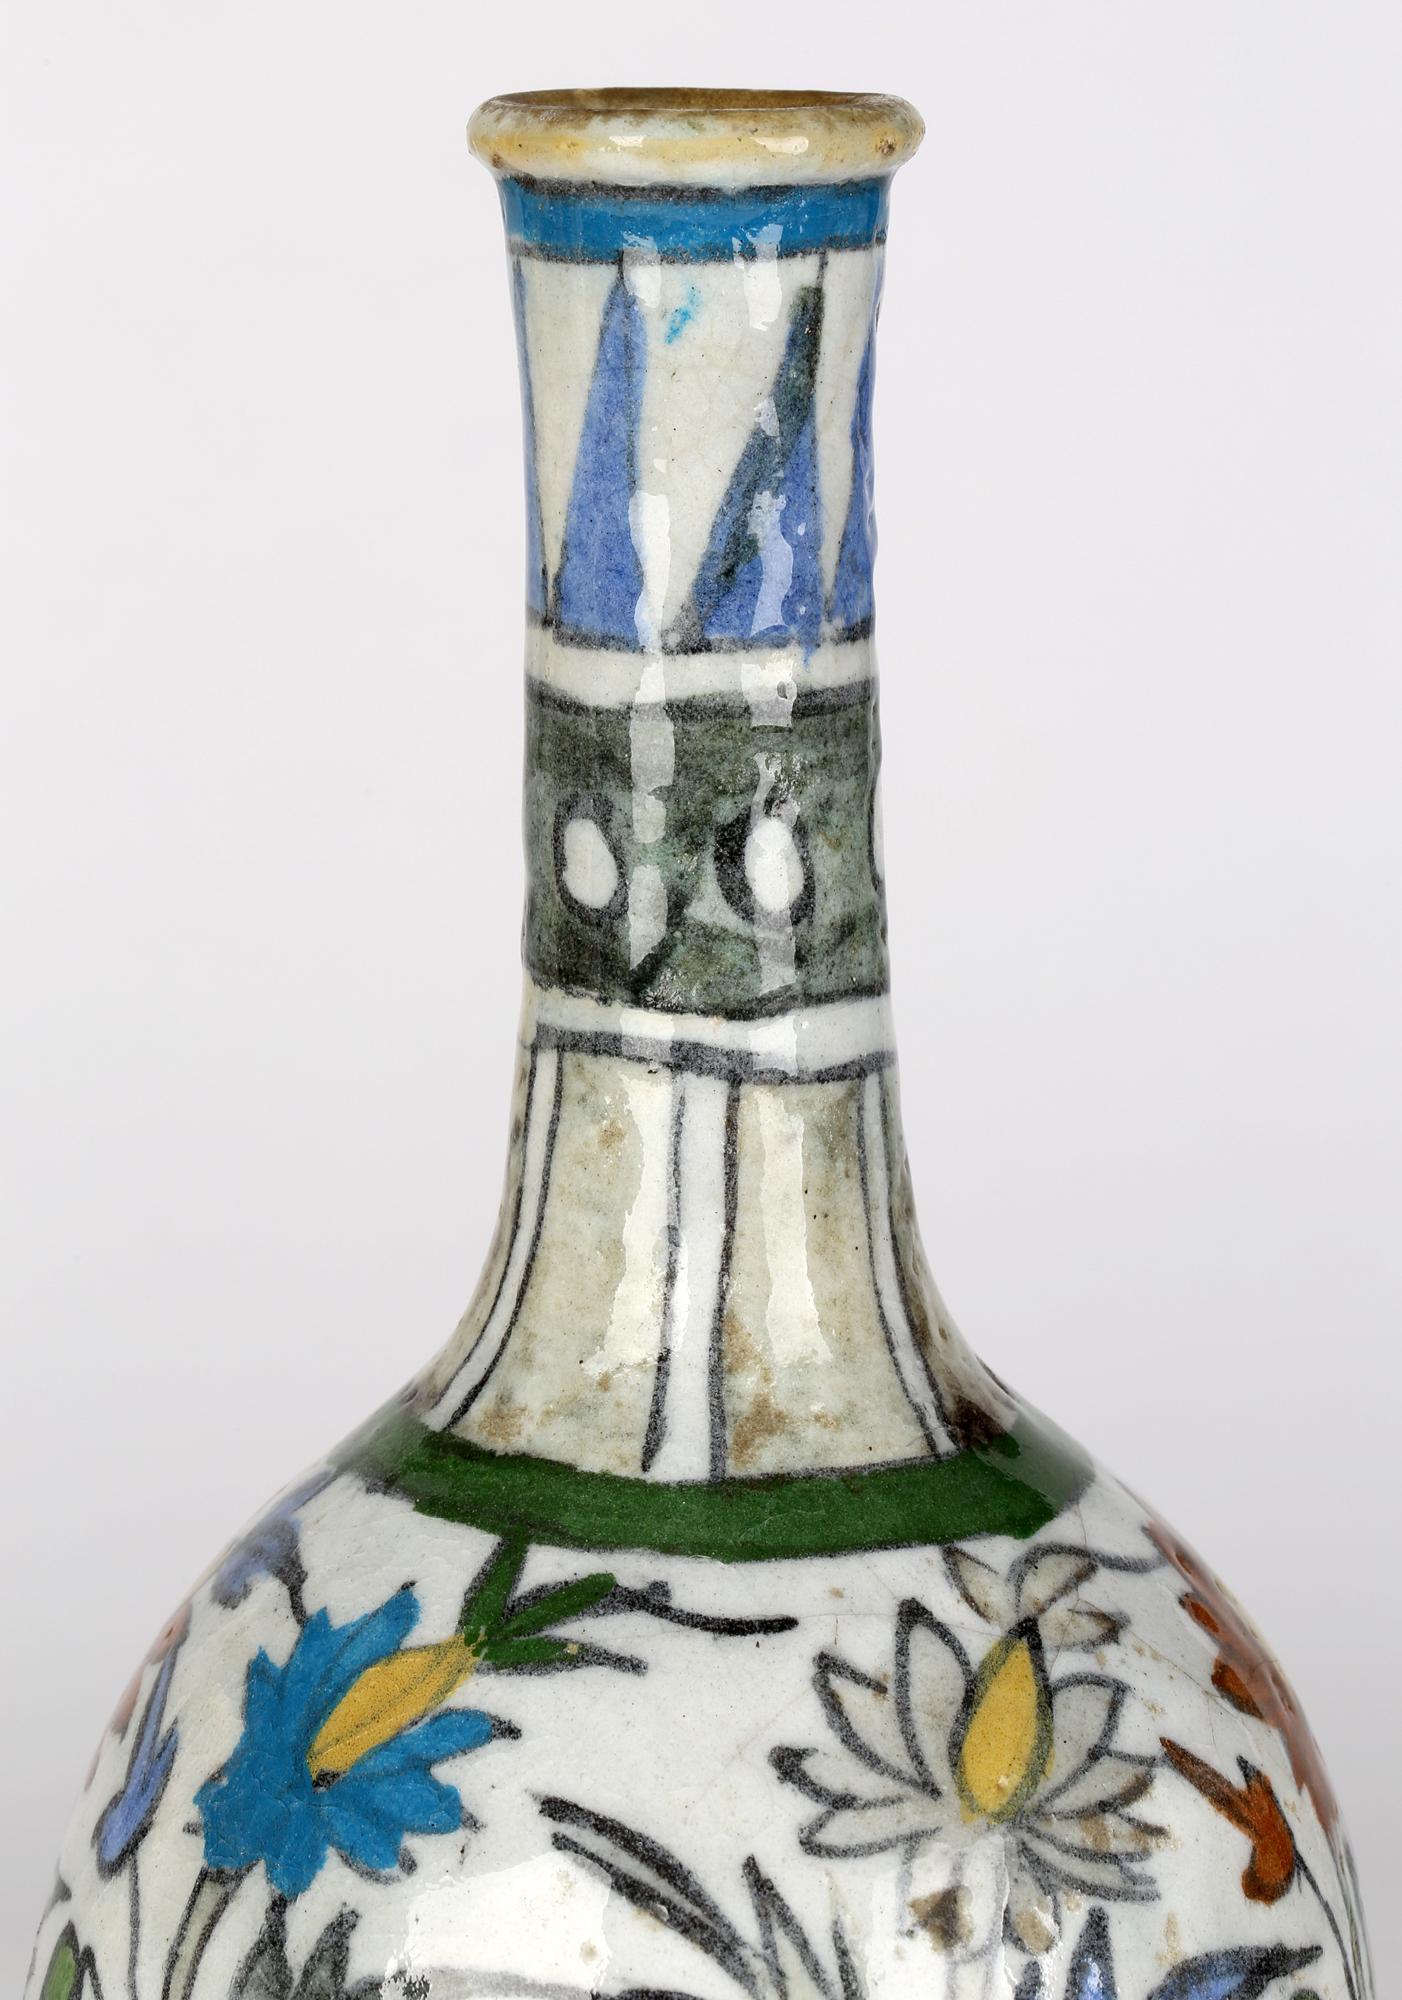 Persian Art Pottery Bottle Shape Vase Hand-Painted with Floral Designs 5